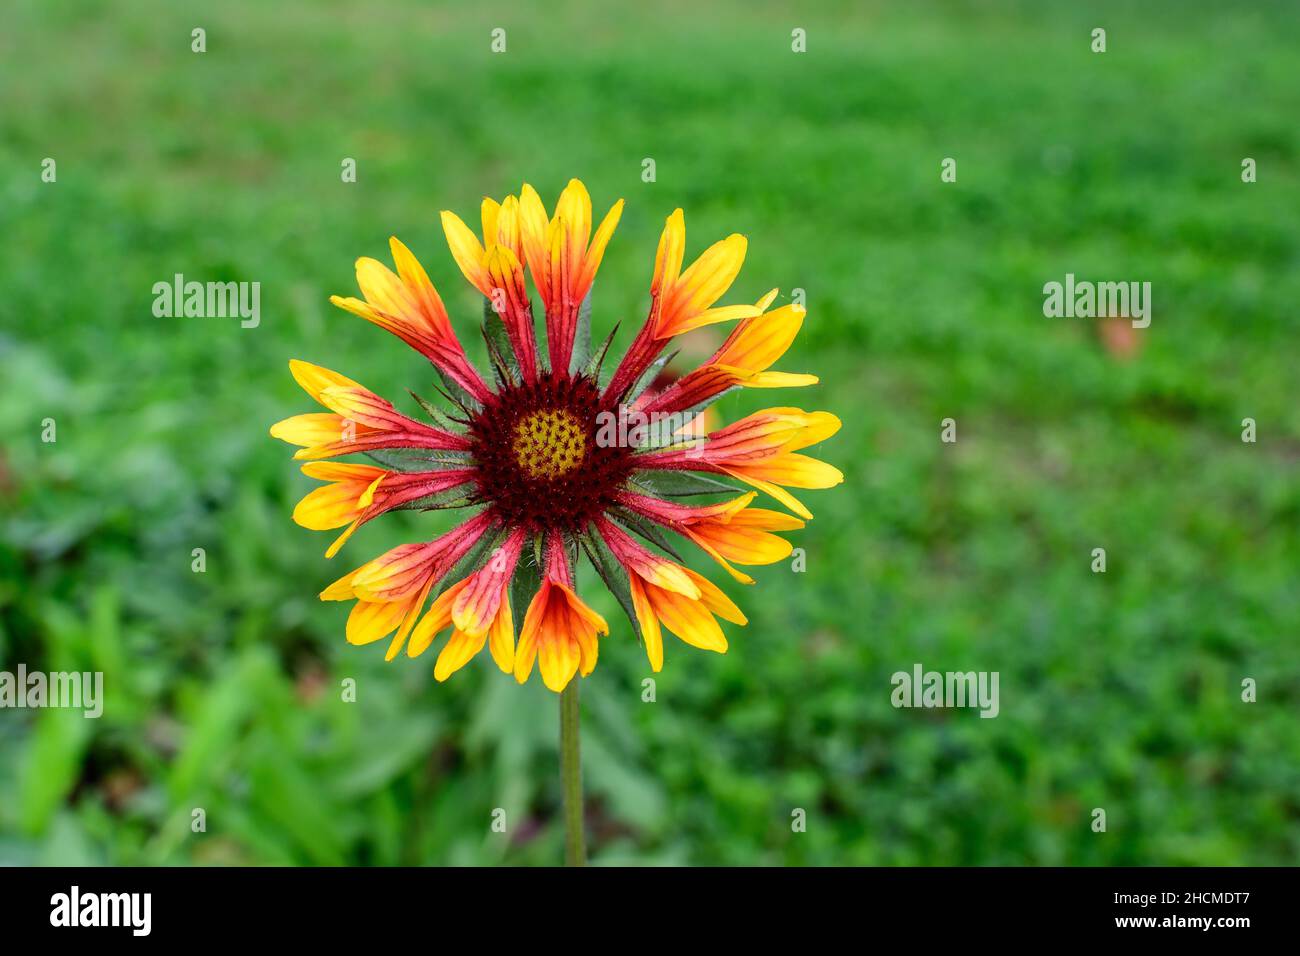 One vivid yellow and orange Gaillardia flower, common known as blanket flower,  and blurred green leaves in soft focus, in a garden in a sunny summer Stock Photo